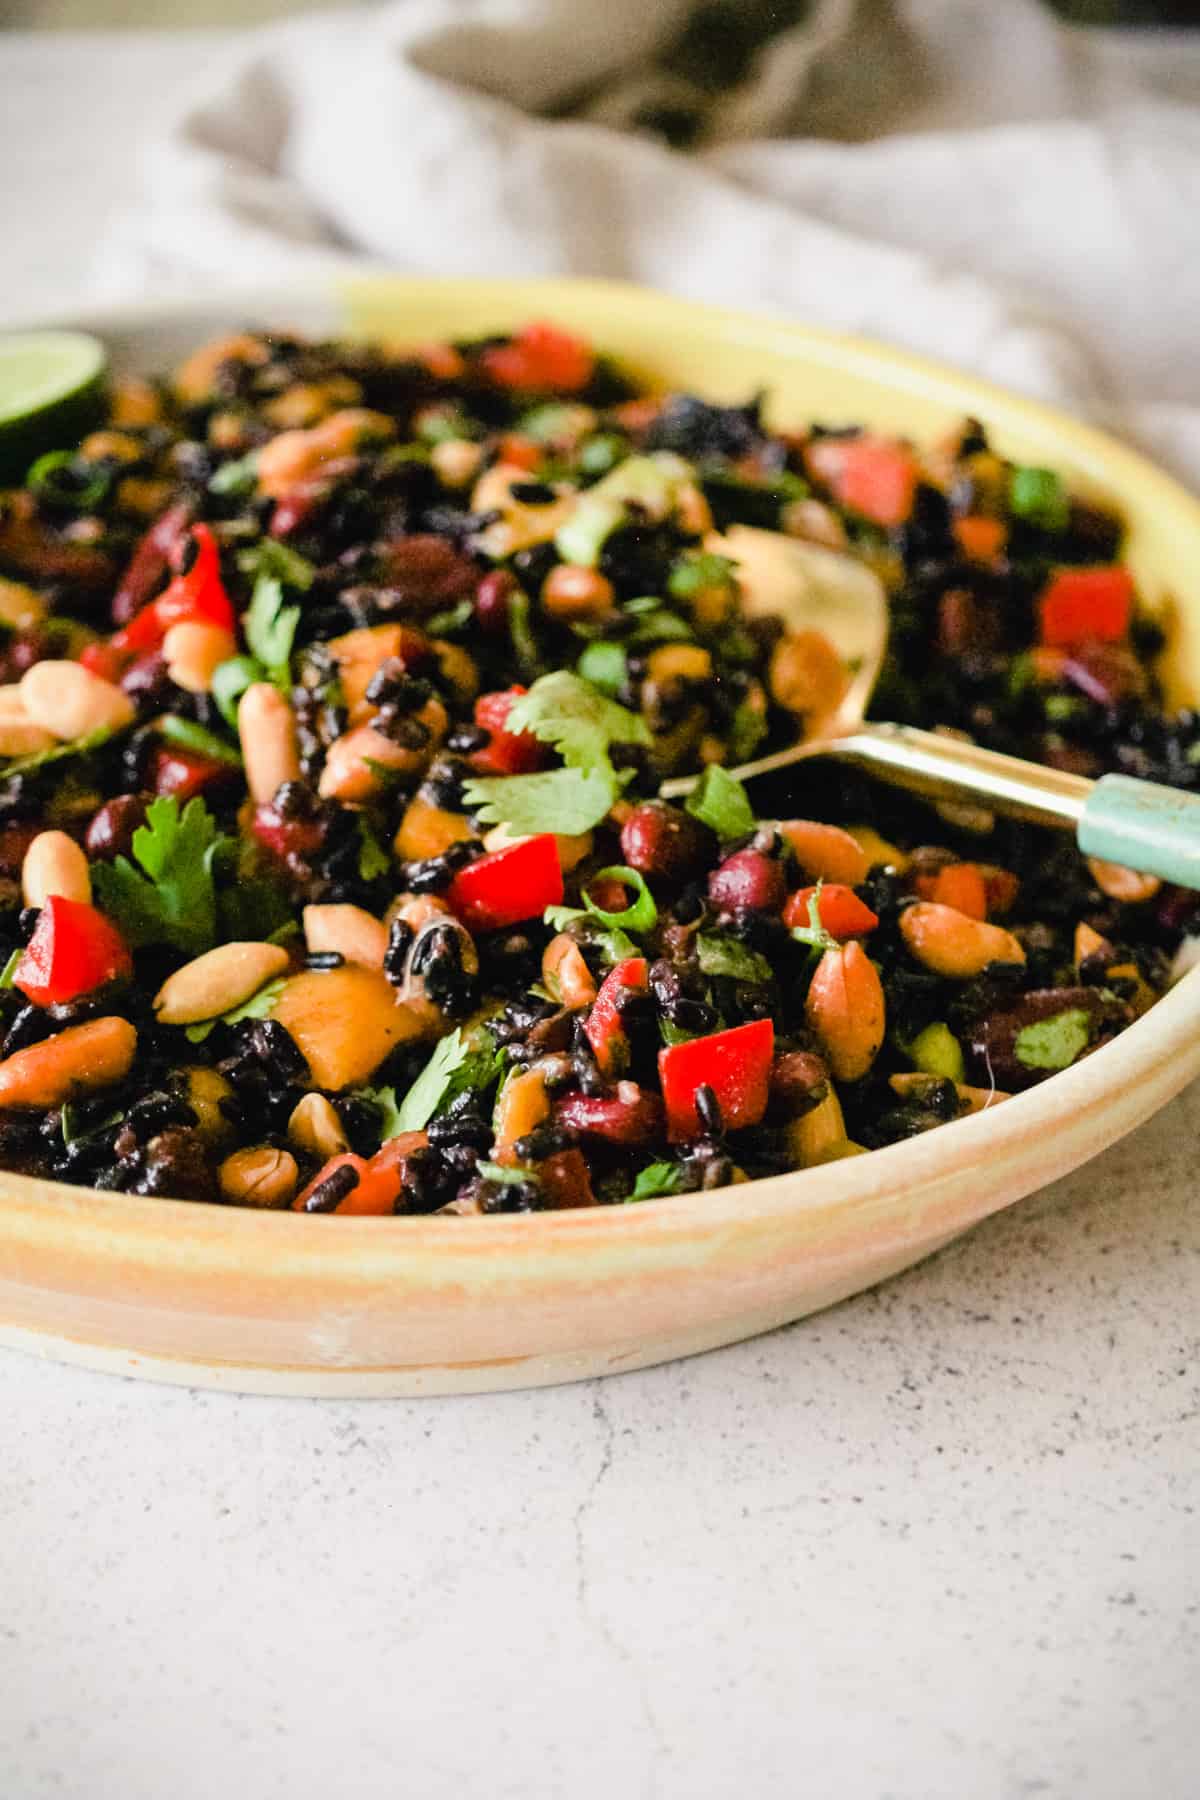 Black rice and bean salad in a yellow ceramic serving dish.